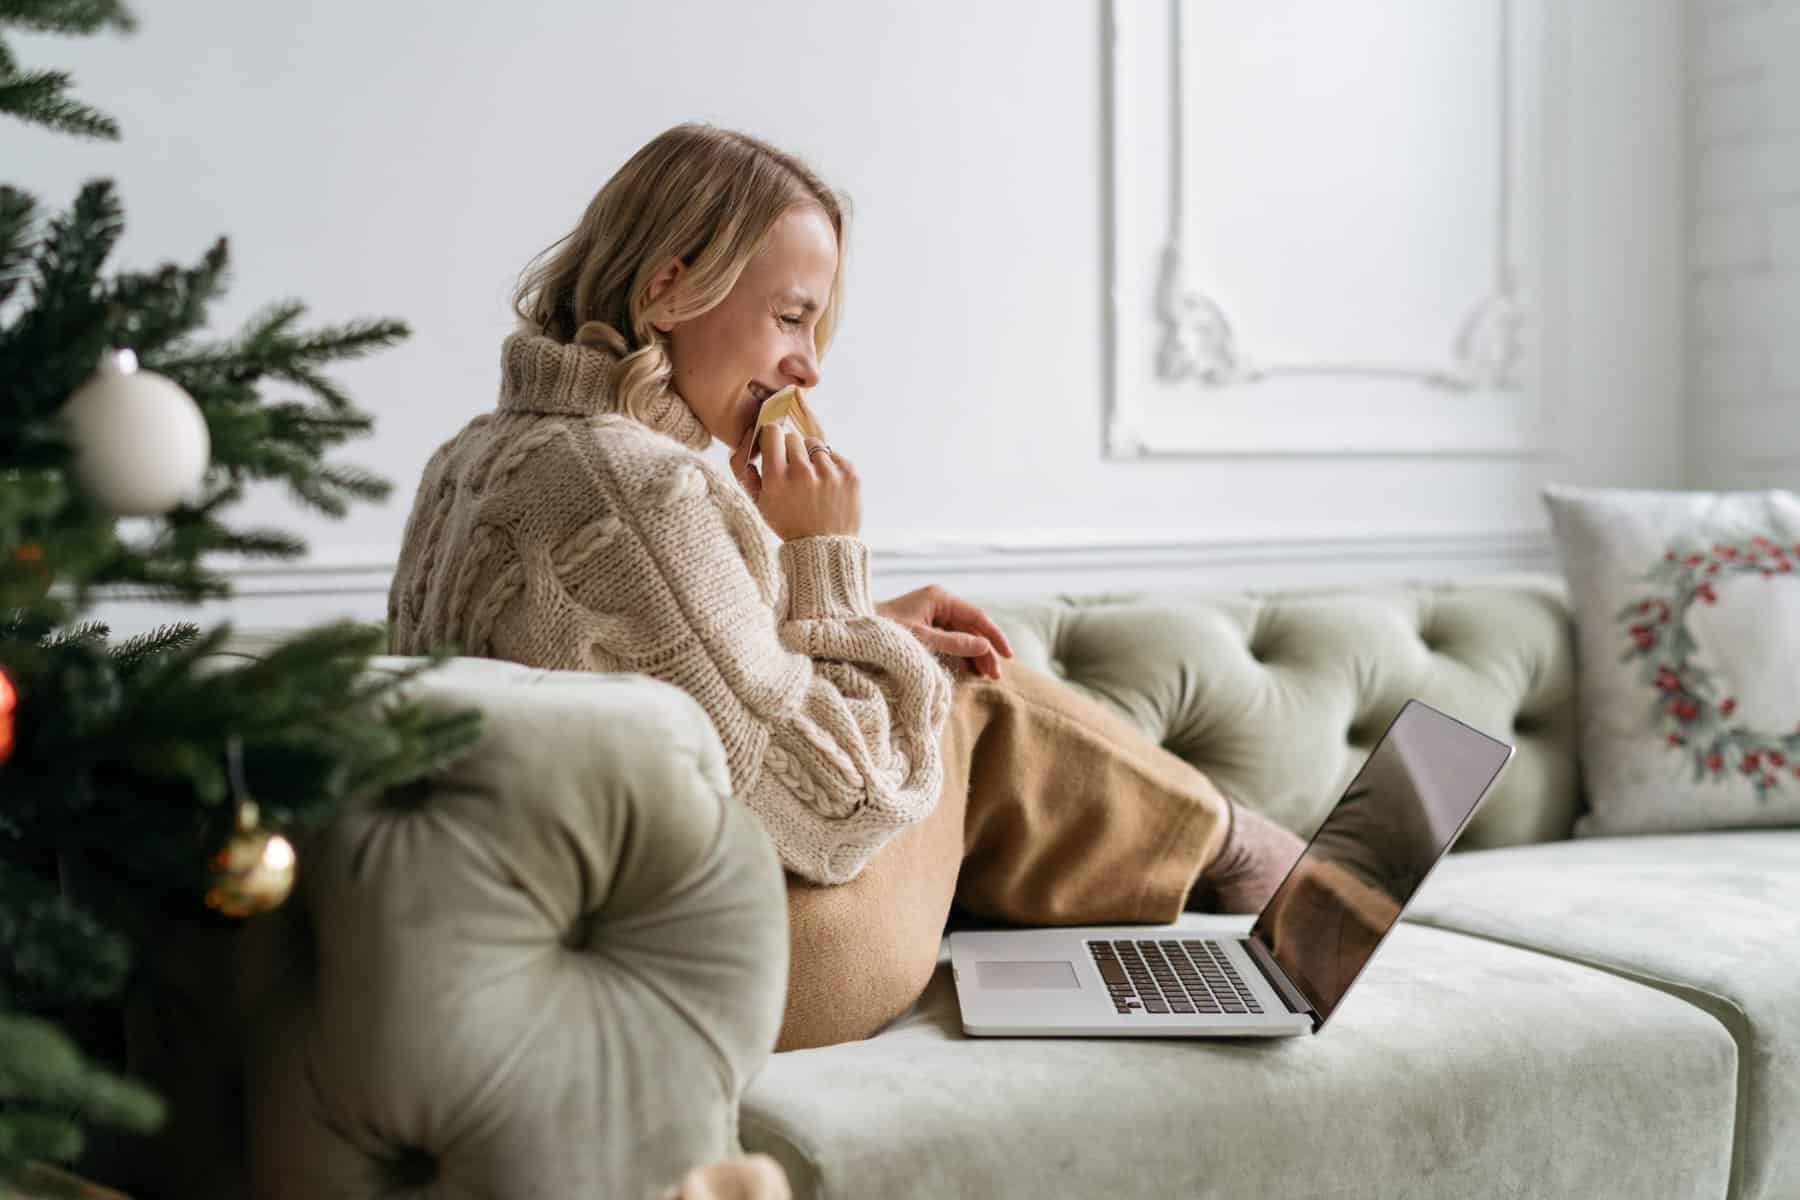 Woman watching holiday romantic comedies on her laptop on couch.